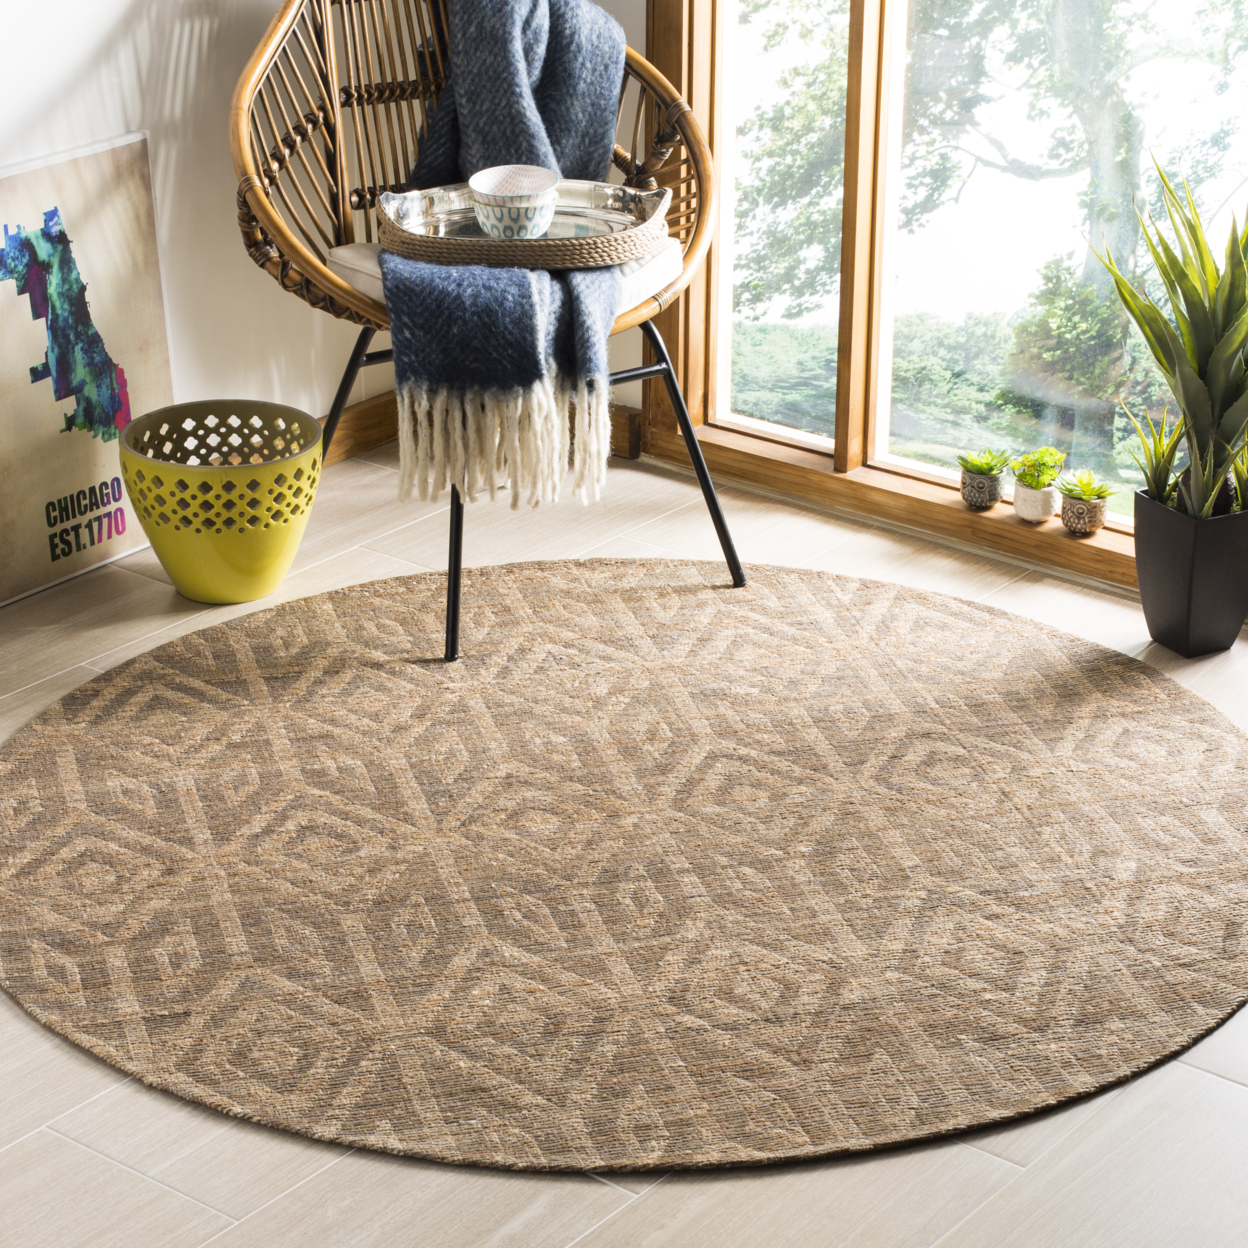 SAFAVIEH Cape Cod Collection CAP411A Handwoven Camel Rug - 6' Square